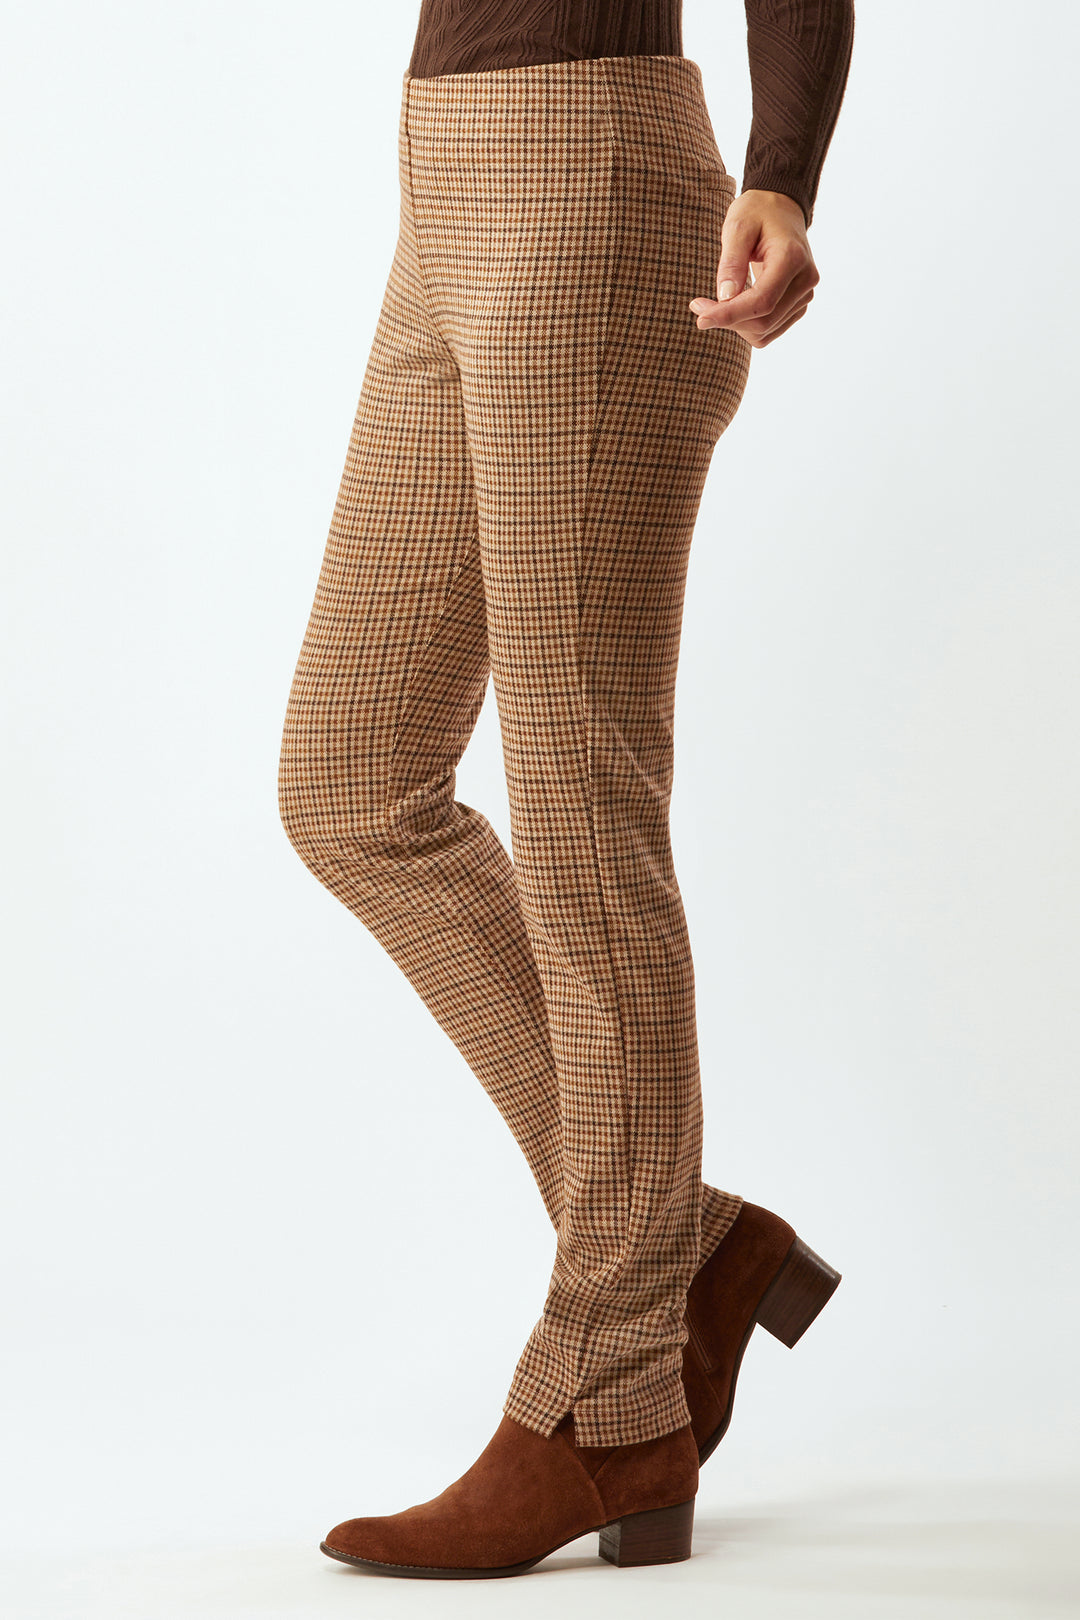 Springfield Classic Pull-On In Park Avenue Stretch - Autumn Check